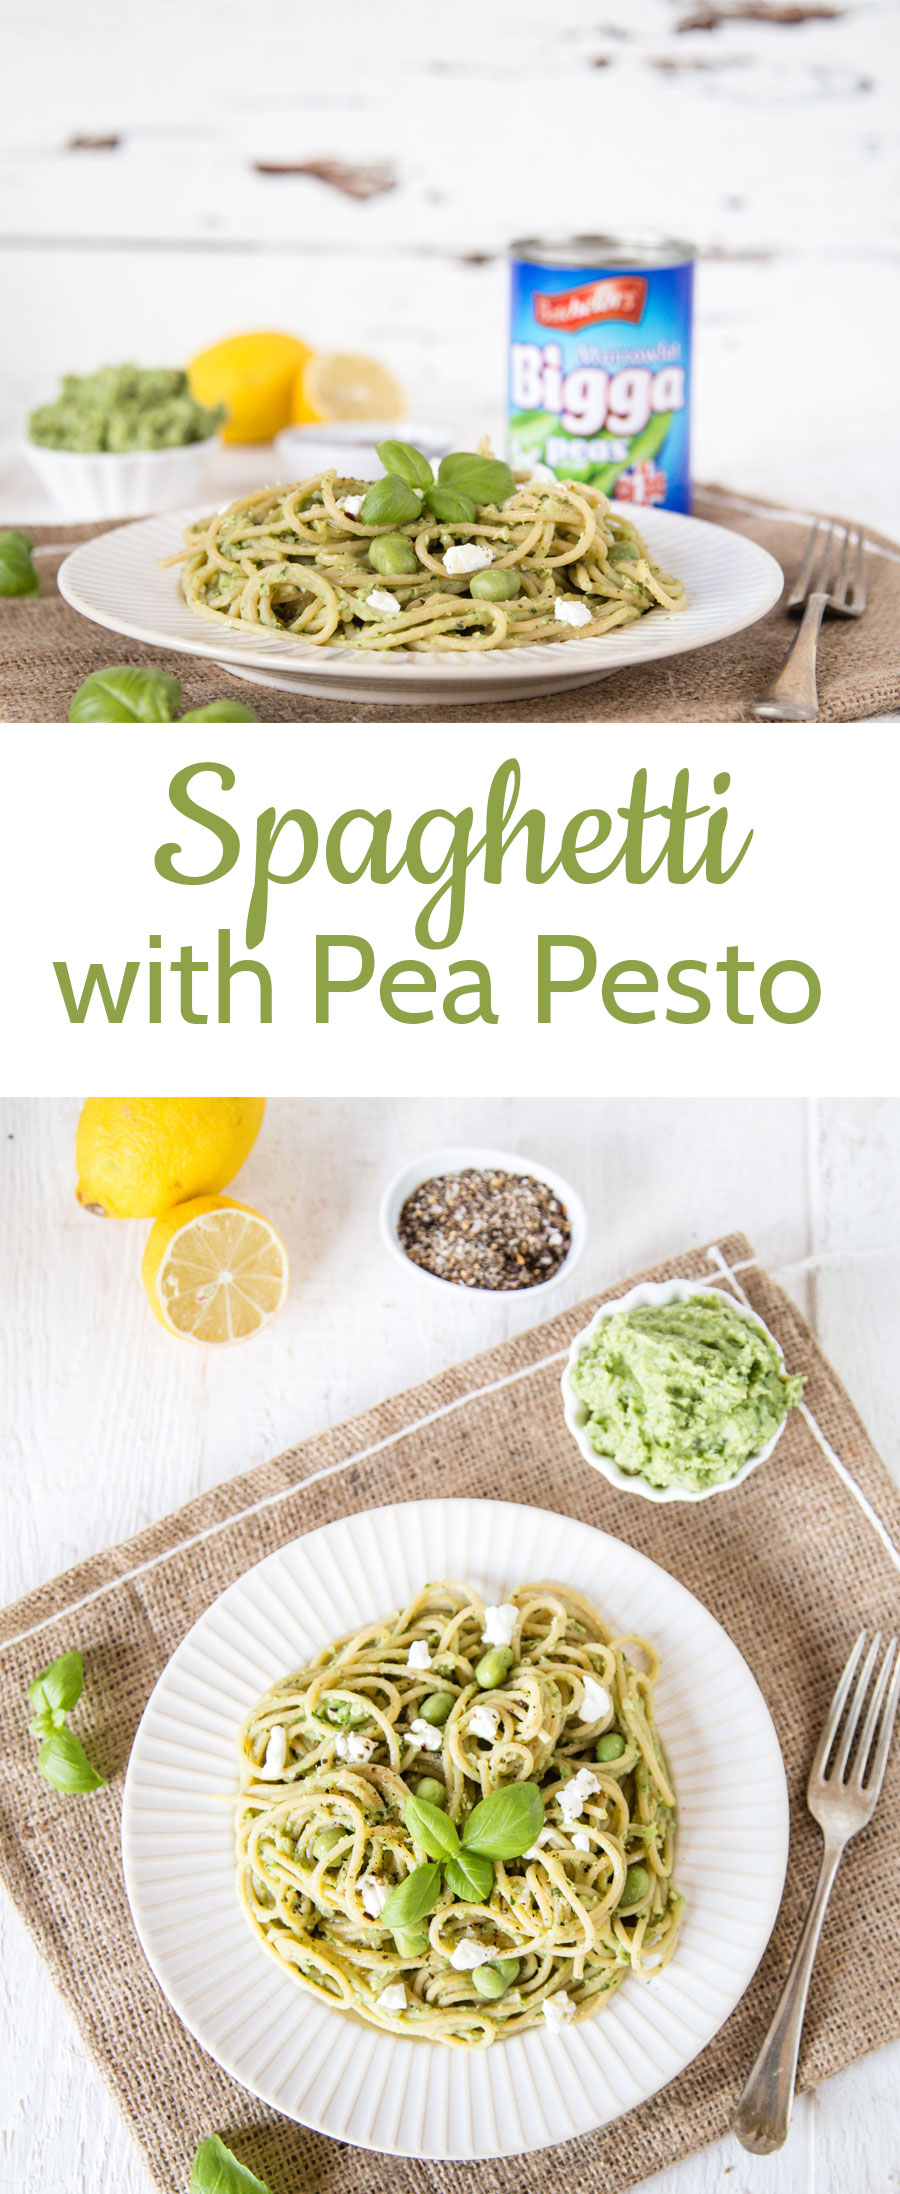 Homemade pea pesto is quick and easy to make, as well as delicious